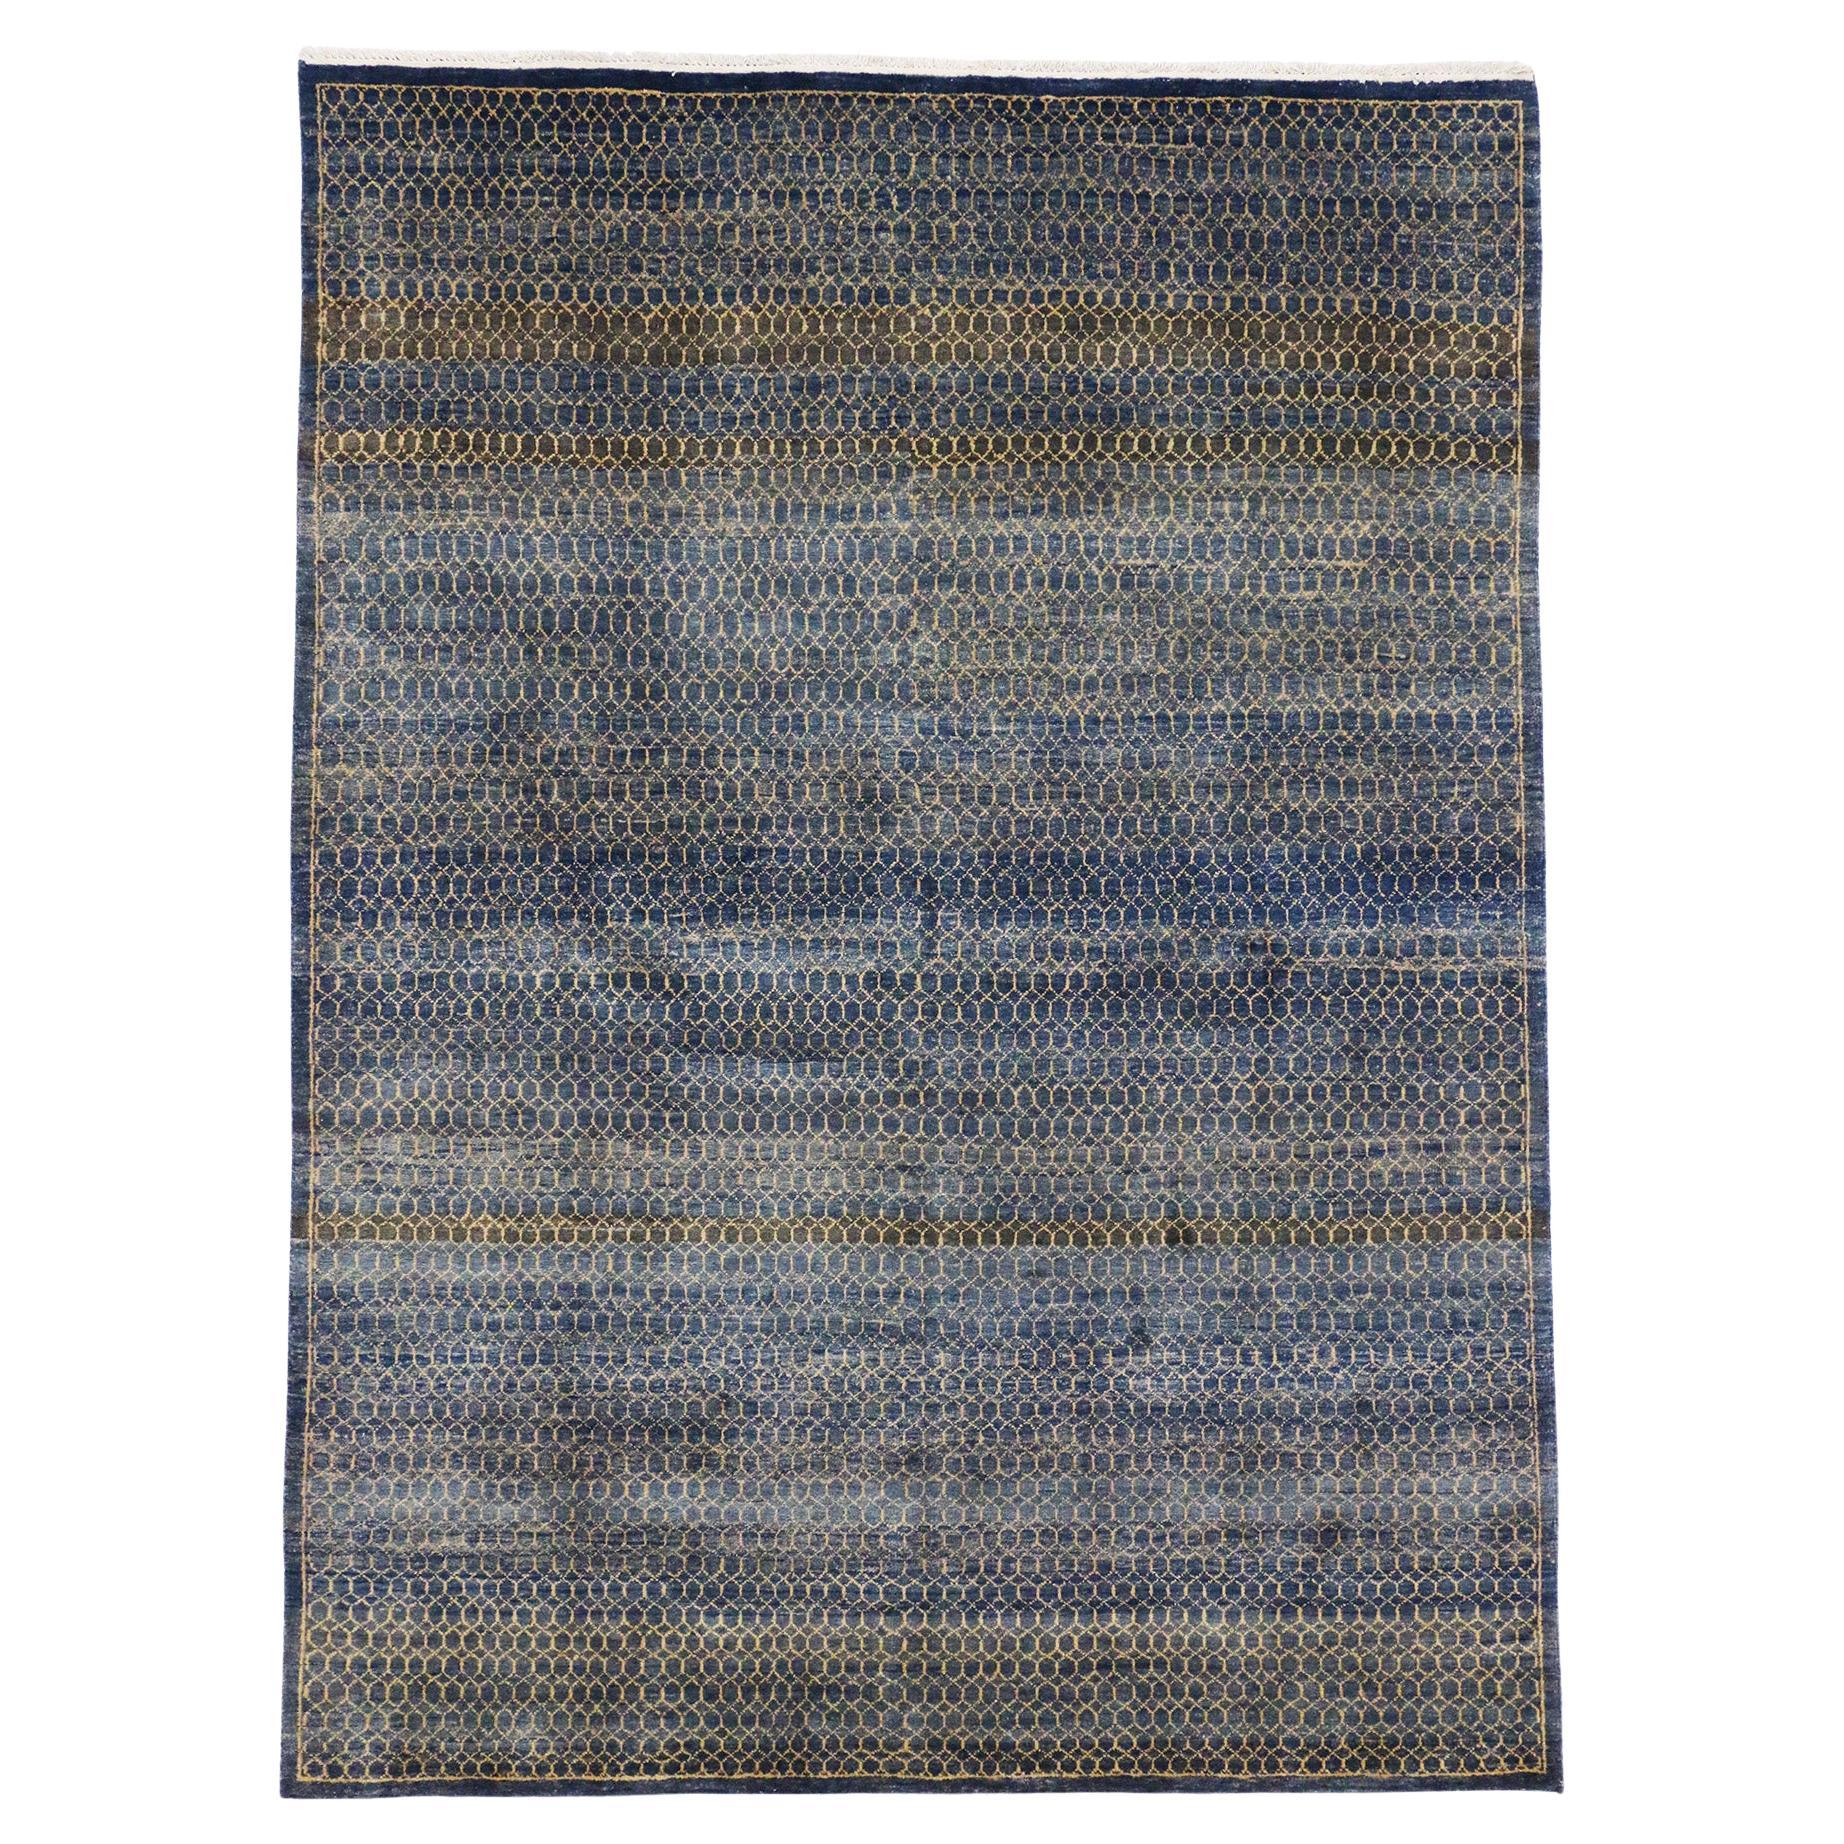 Transitional Navy Blue Indian Area Rug, Timeless Appeal Meets Classic Elegance